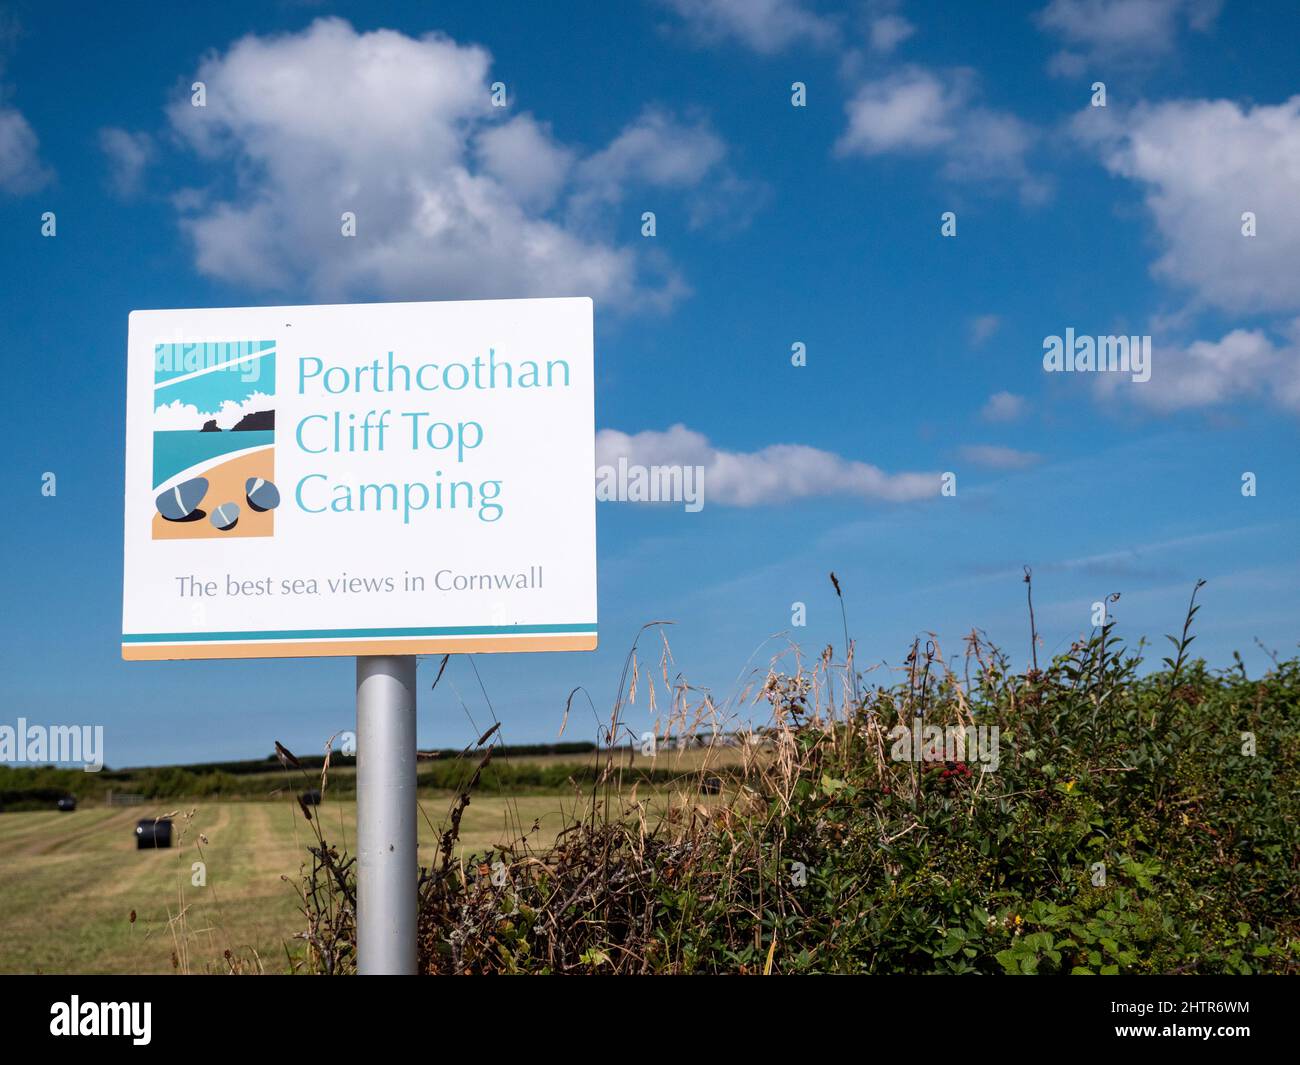 The sign for Porthcothan Cliff Top camping site in Porthcothan Bay Cornwall UK a pop up campsite in response to Covid pandemic Stock Photo